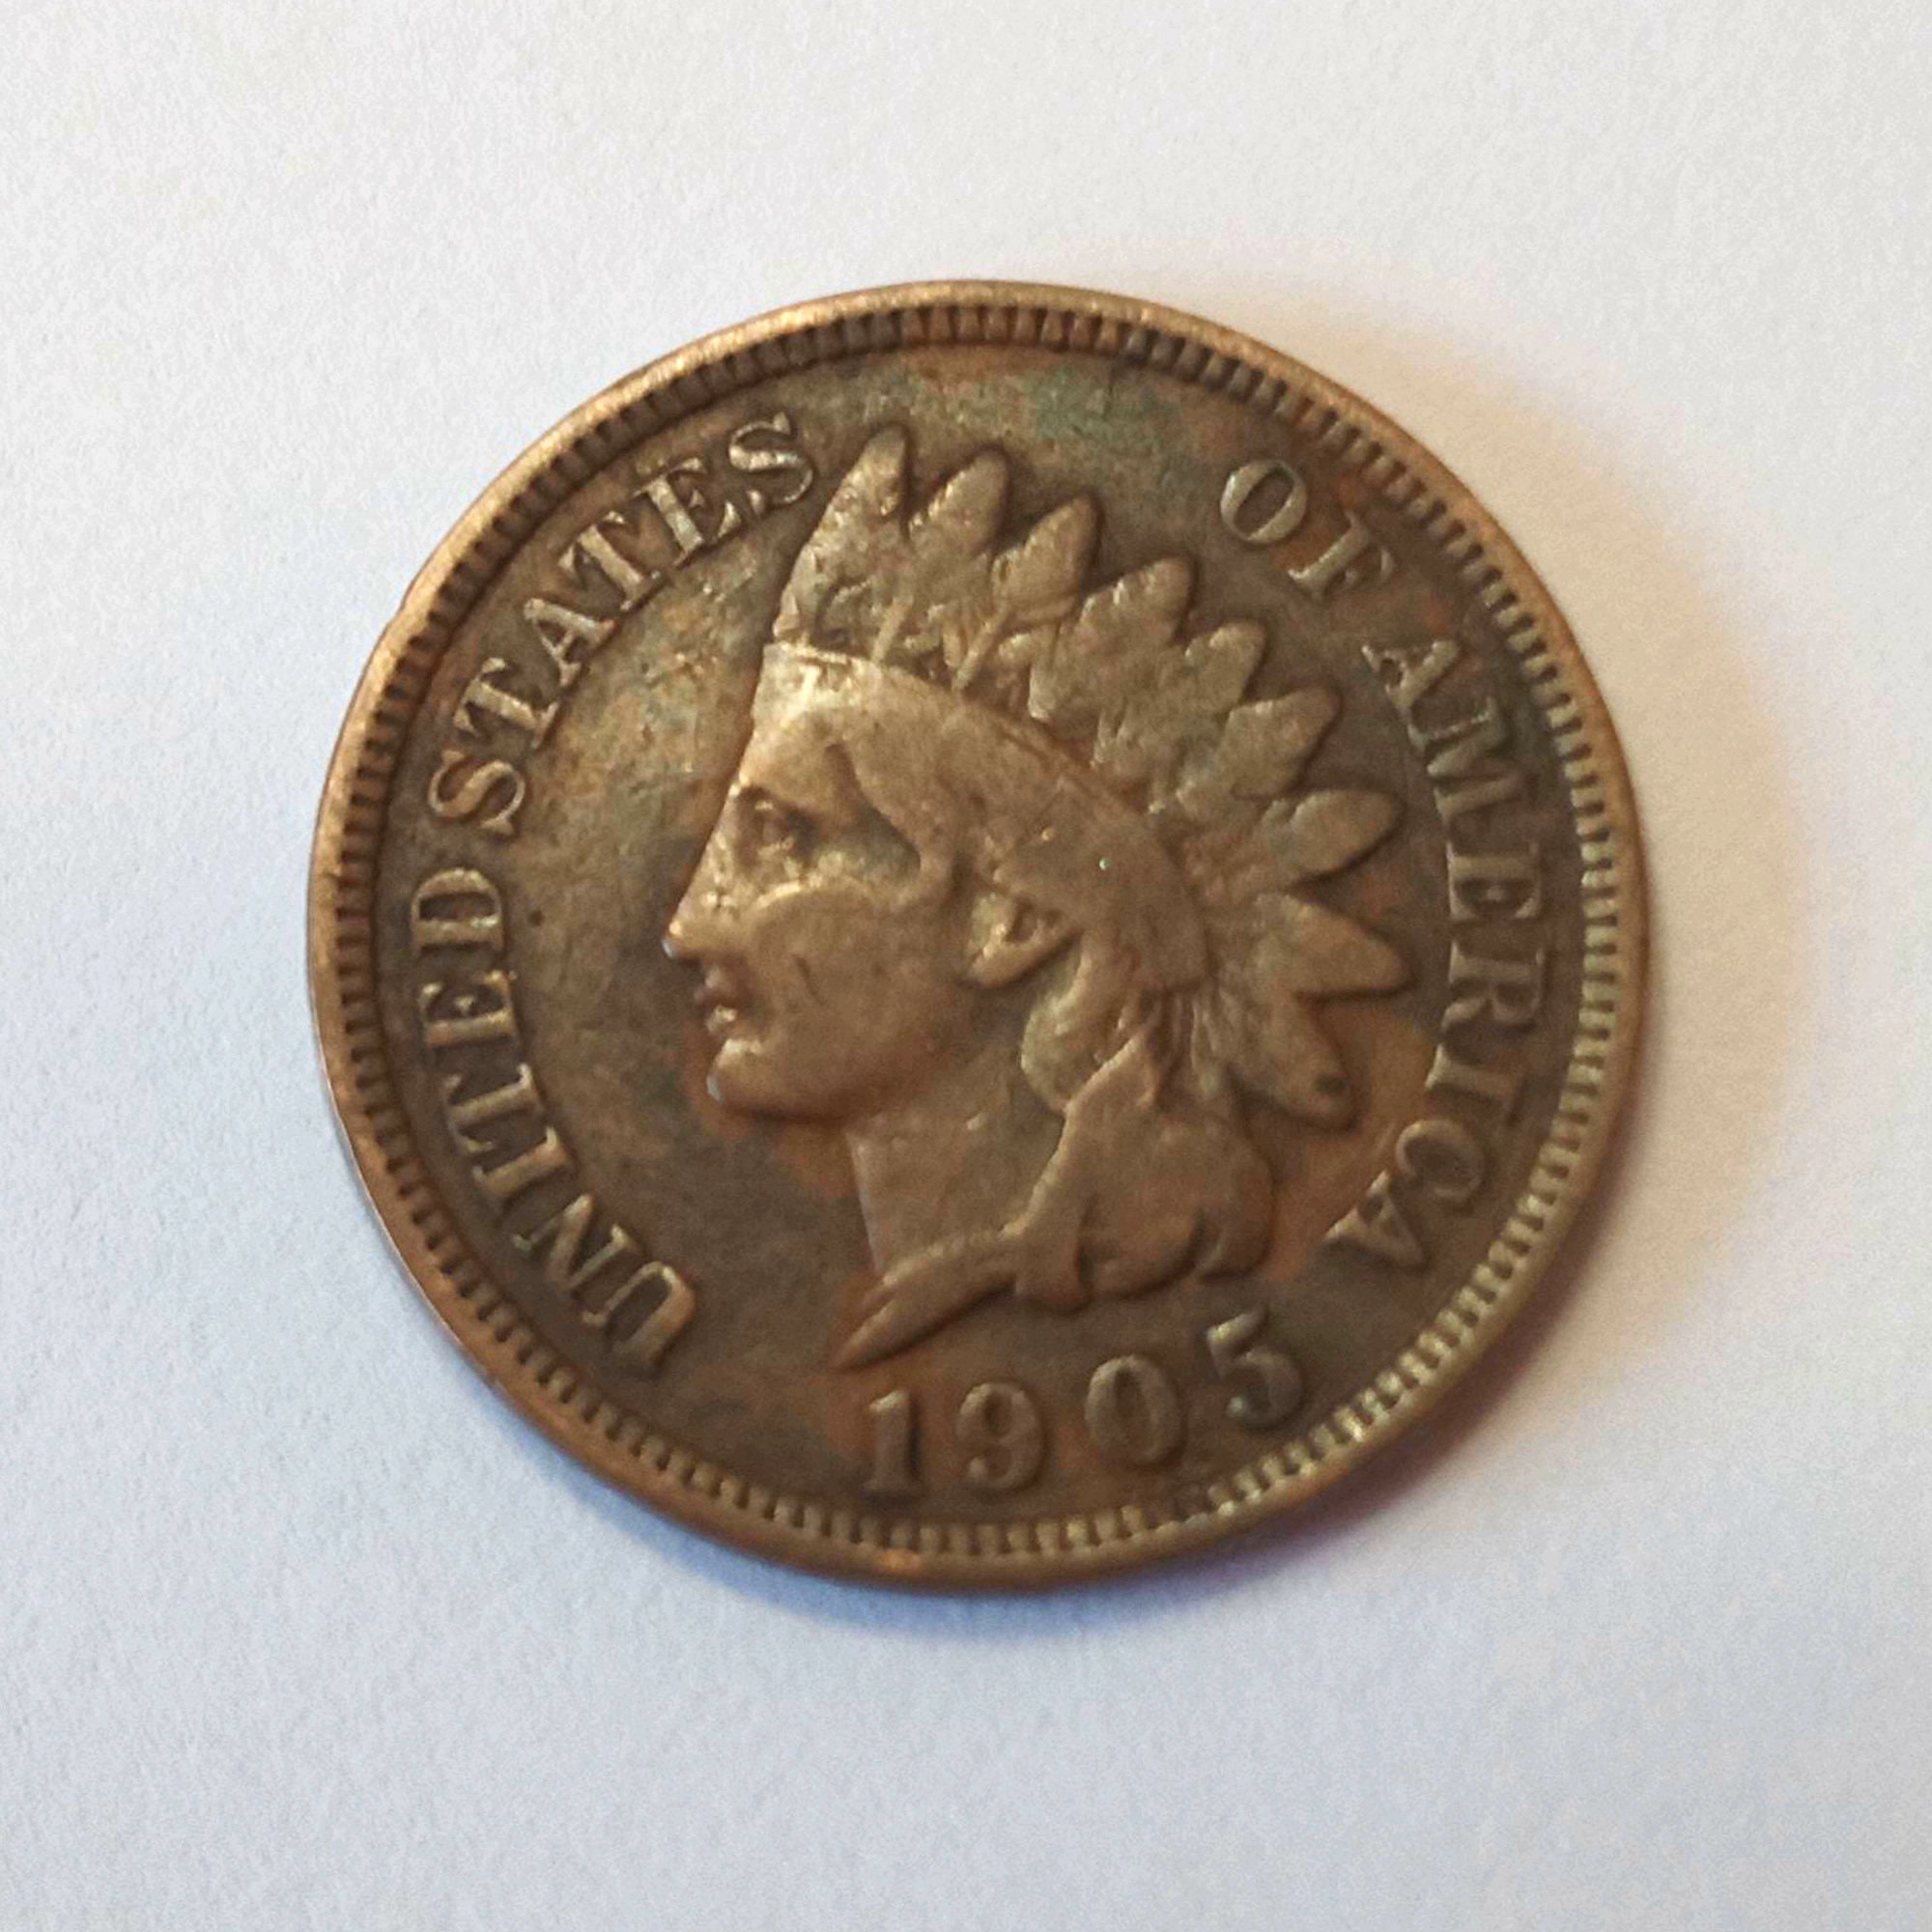 1905 American PENNY USA copper 1 cent coin with Indian Head | Etsy